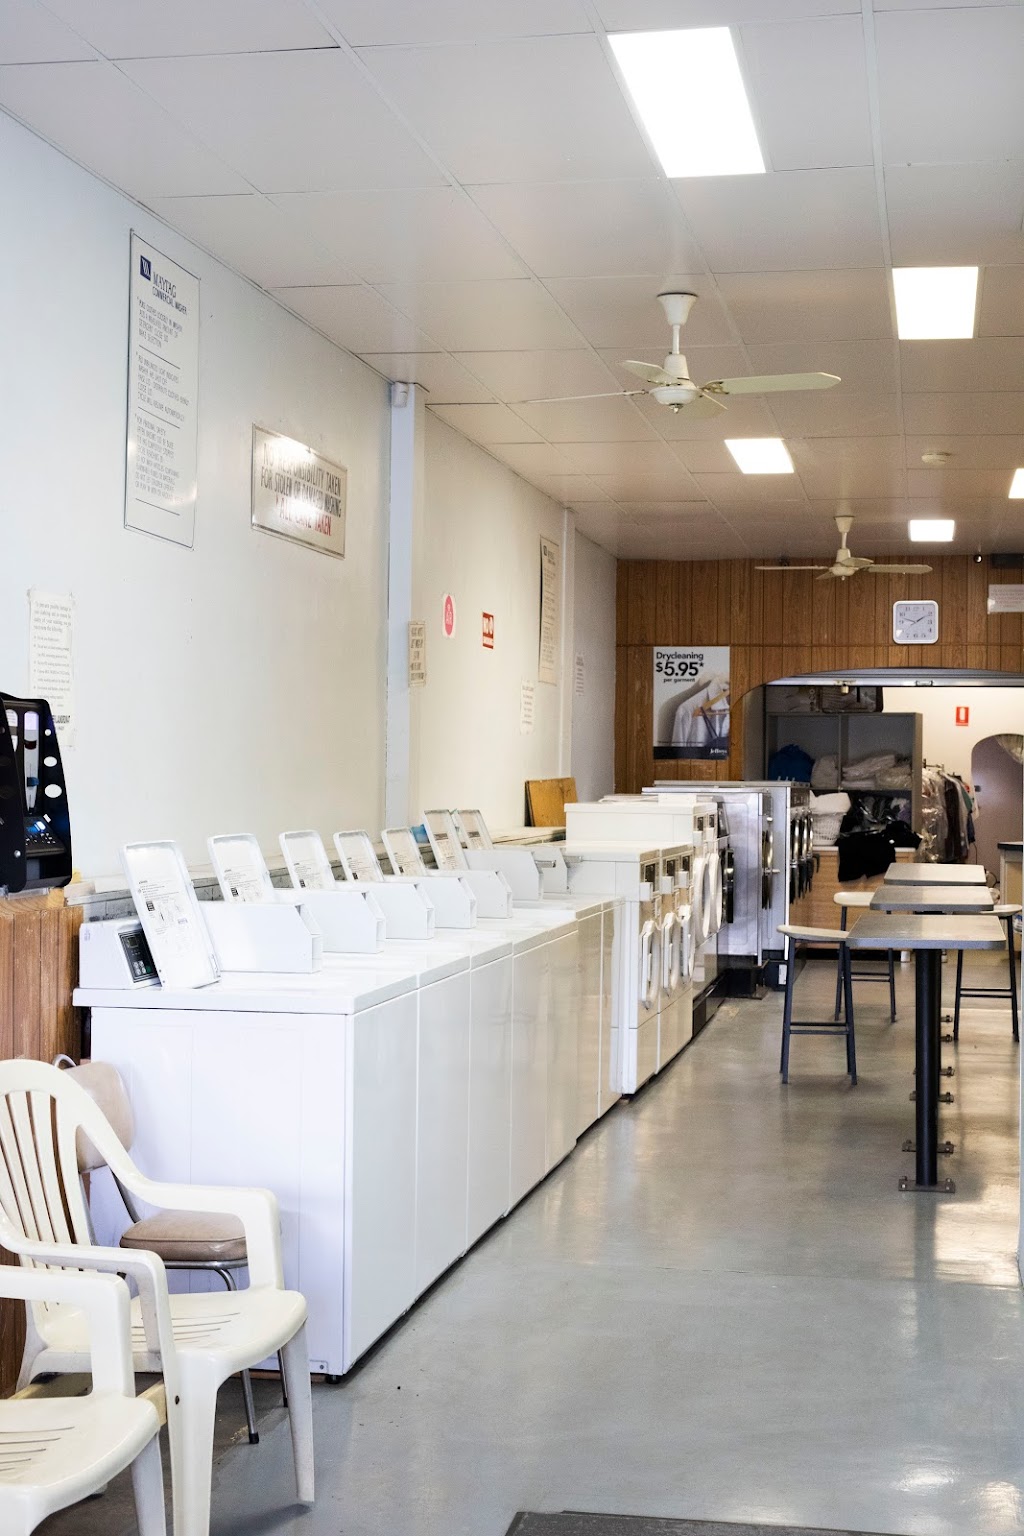 East Doncaster Laundromat | laundry | 21 Tunstall Square, Doncaster East VIC 3109, Australia | 0398418420 OR +61 3 9841 8420